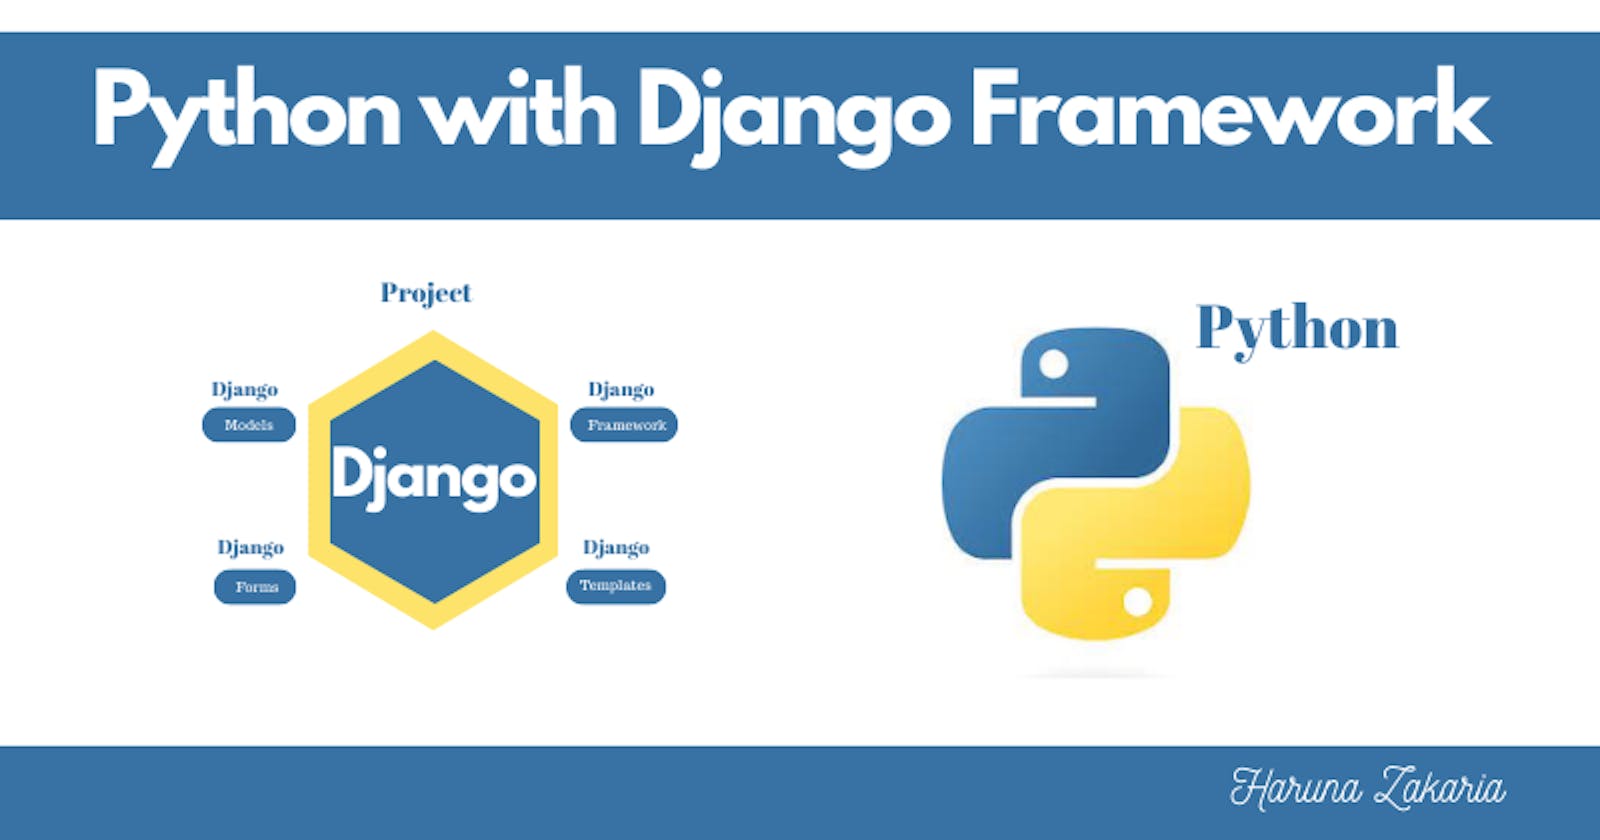 How to get started with Django